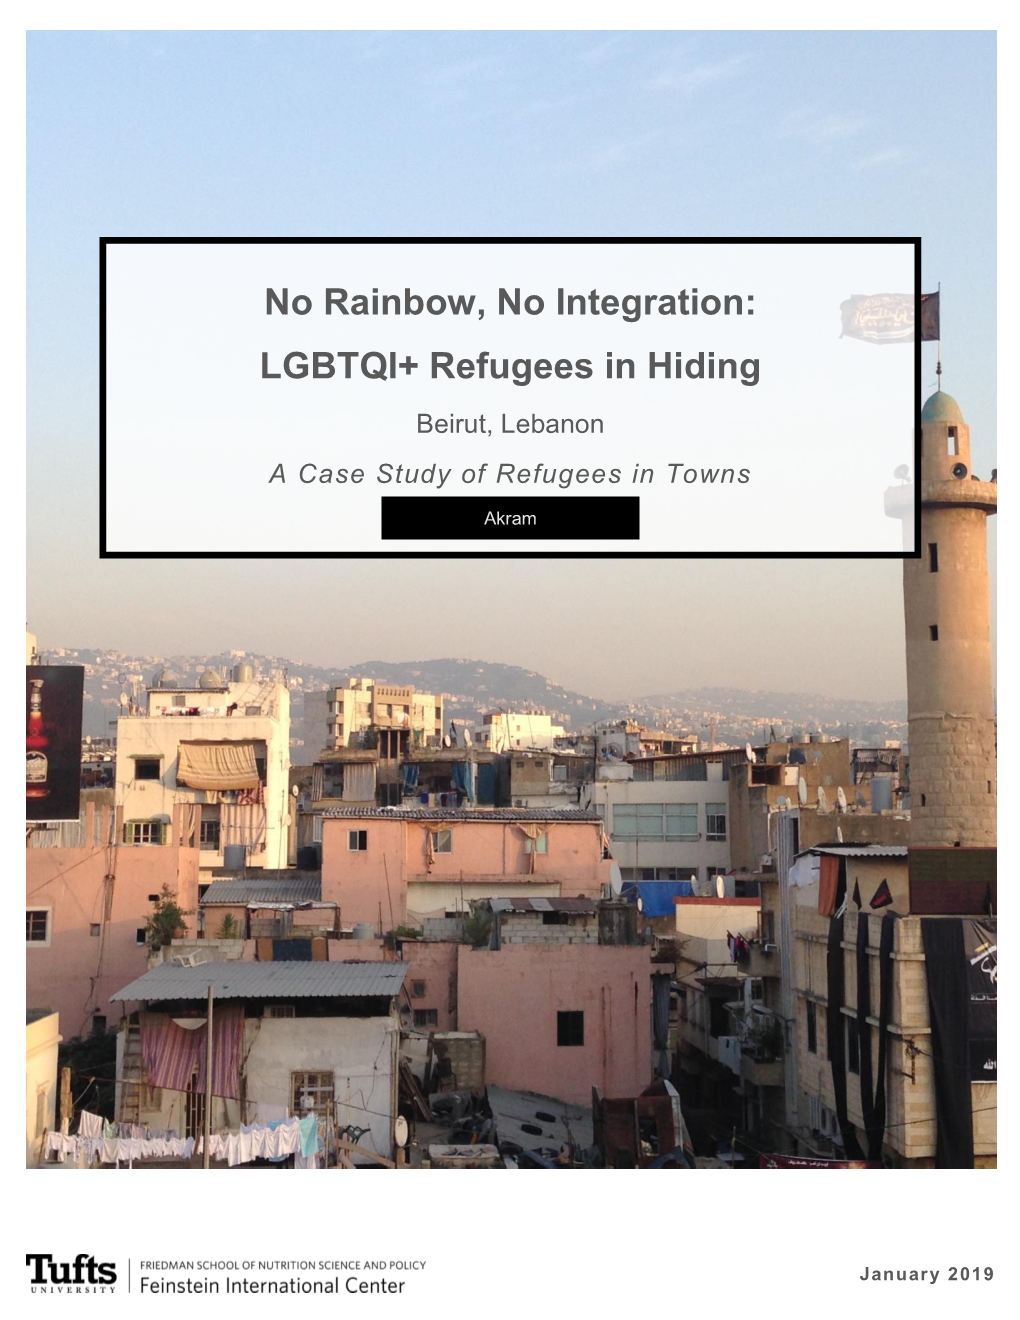 LGBTQI+ Refugees in Hiding Beirut, Lebanon a Case Study of Refugees in Towns